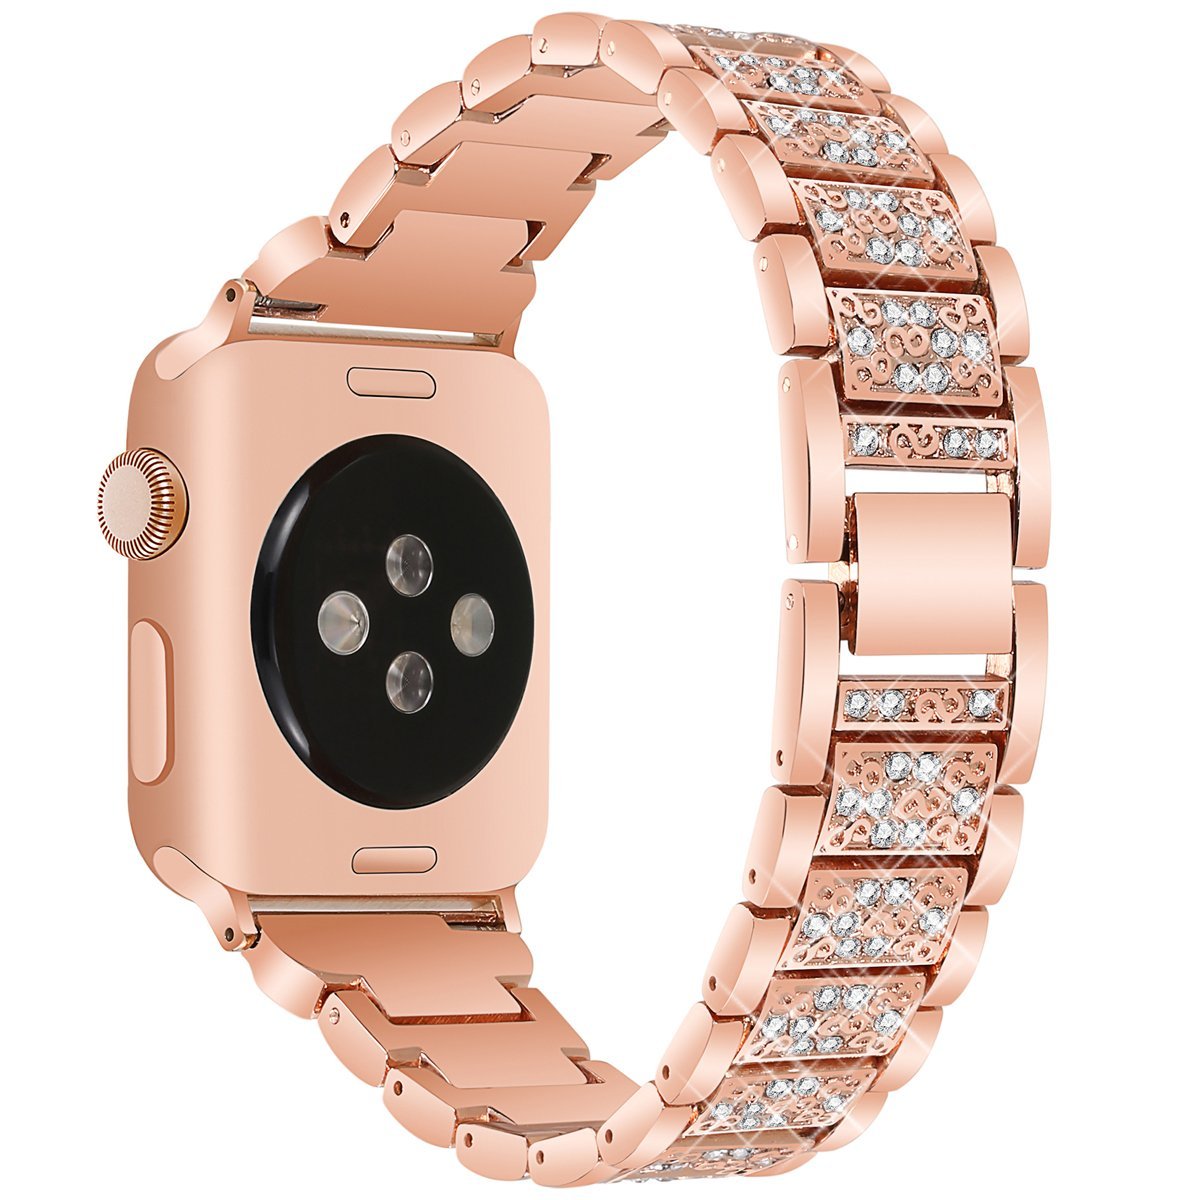 Crystal Patterned Metal Band for Apple Watch